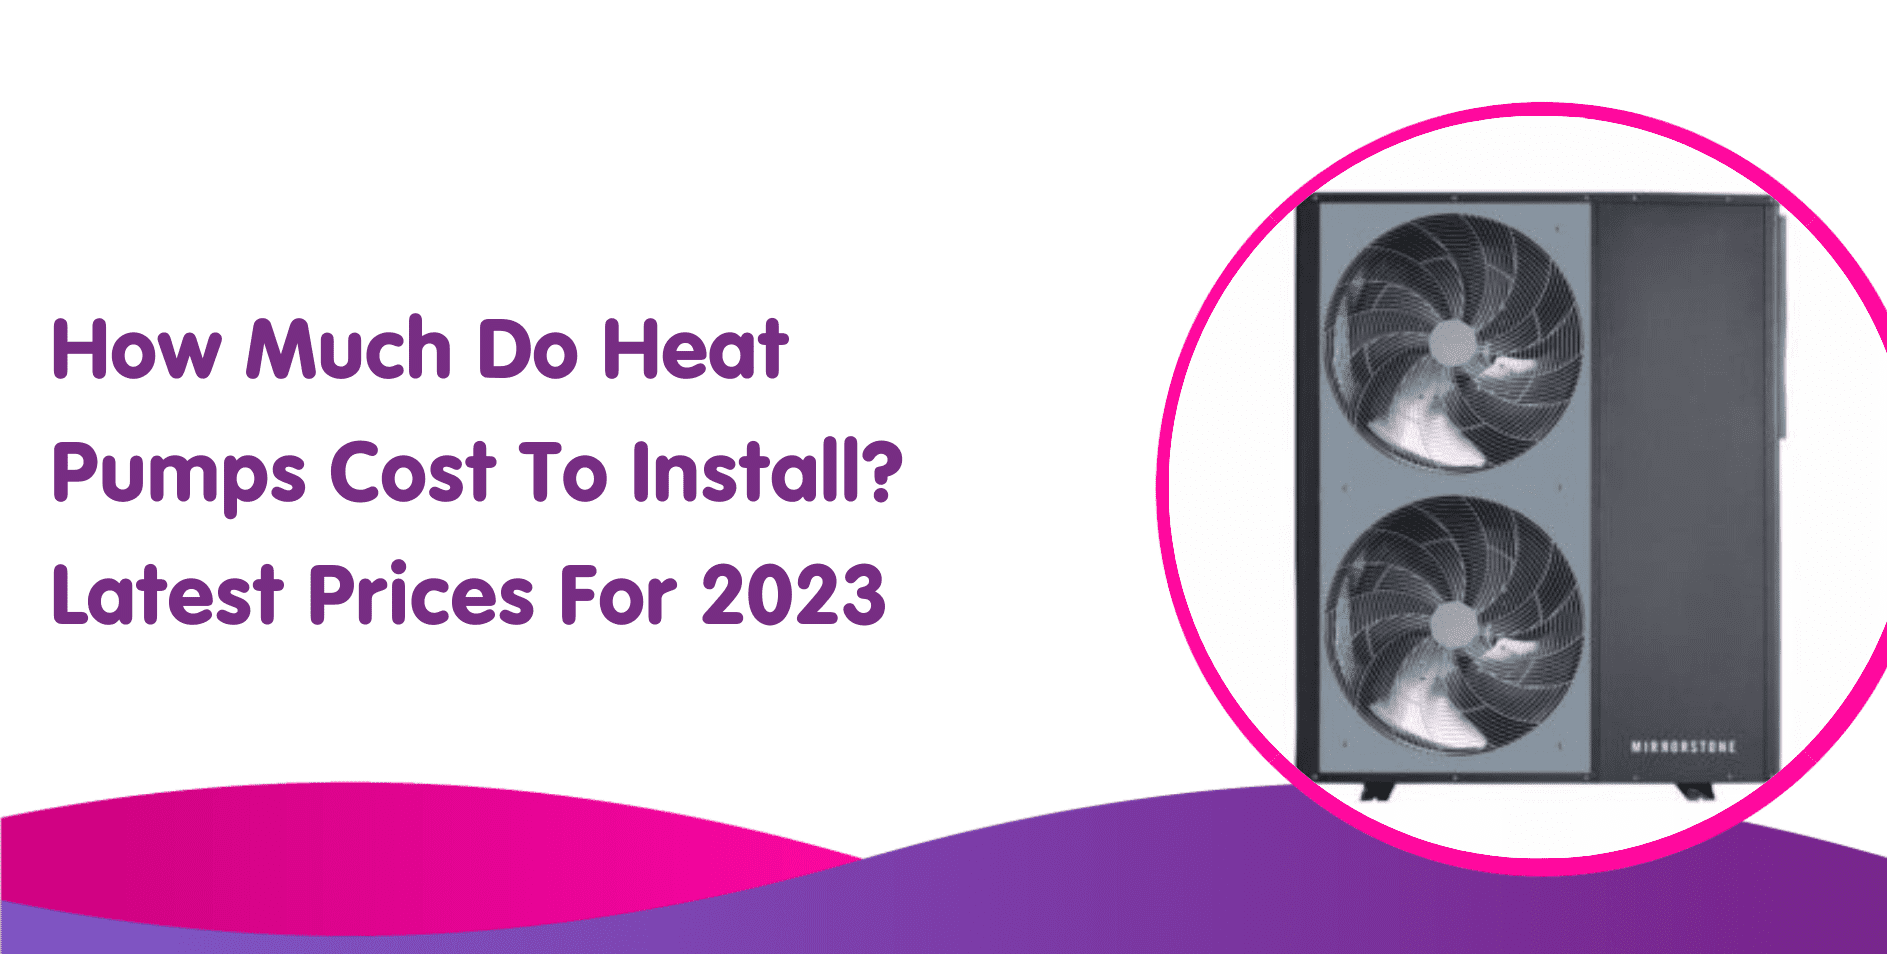 How Much Do Heat Pumps Cost To Install? Latest Prices For 2023